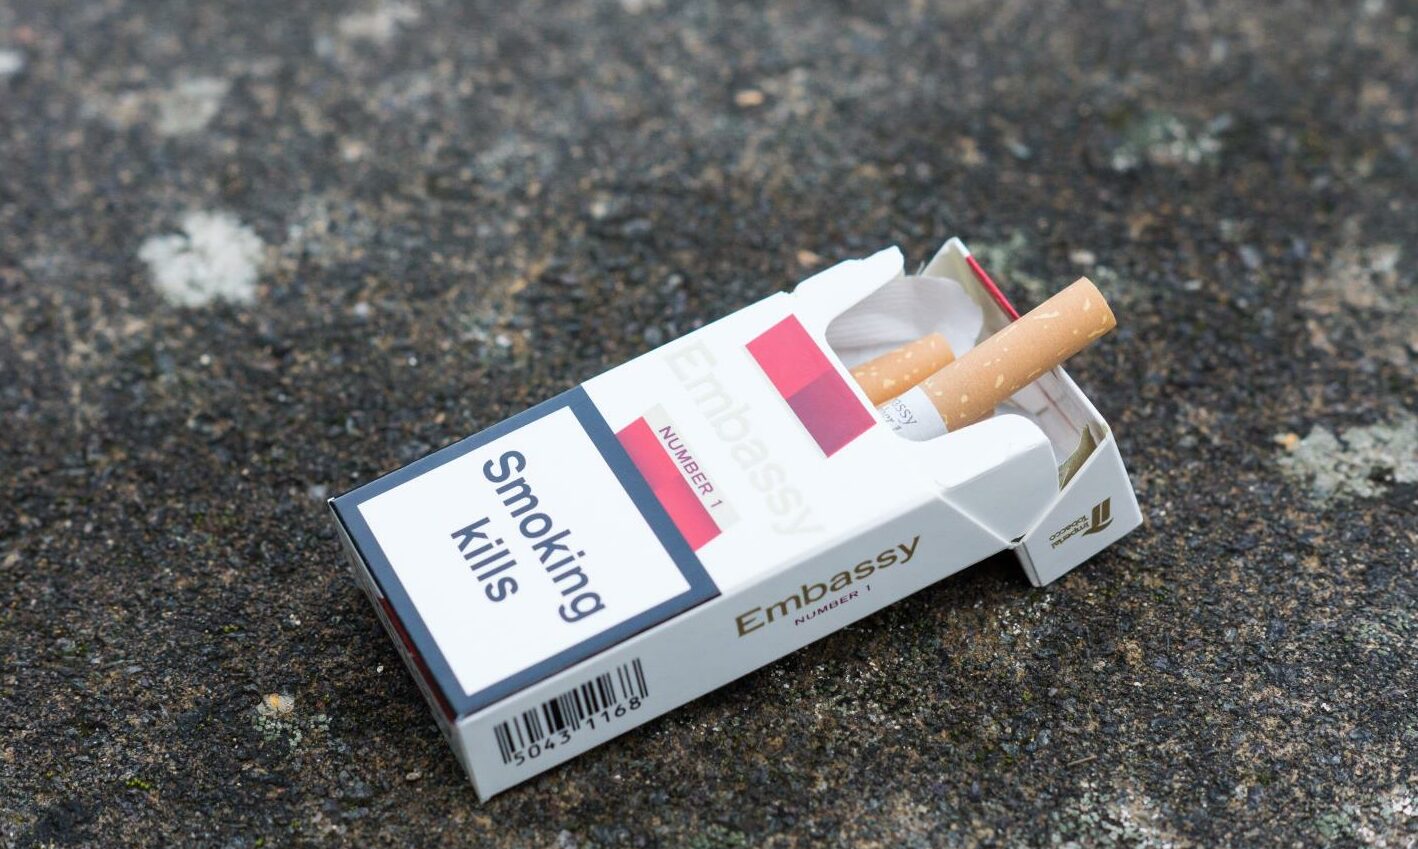 Despite the warnings on packaging, many young adults will still buy cigarettes.